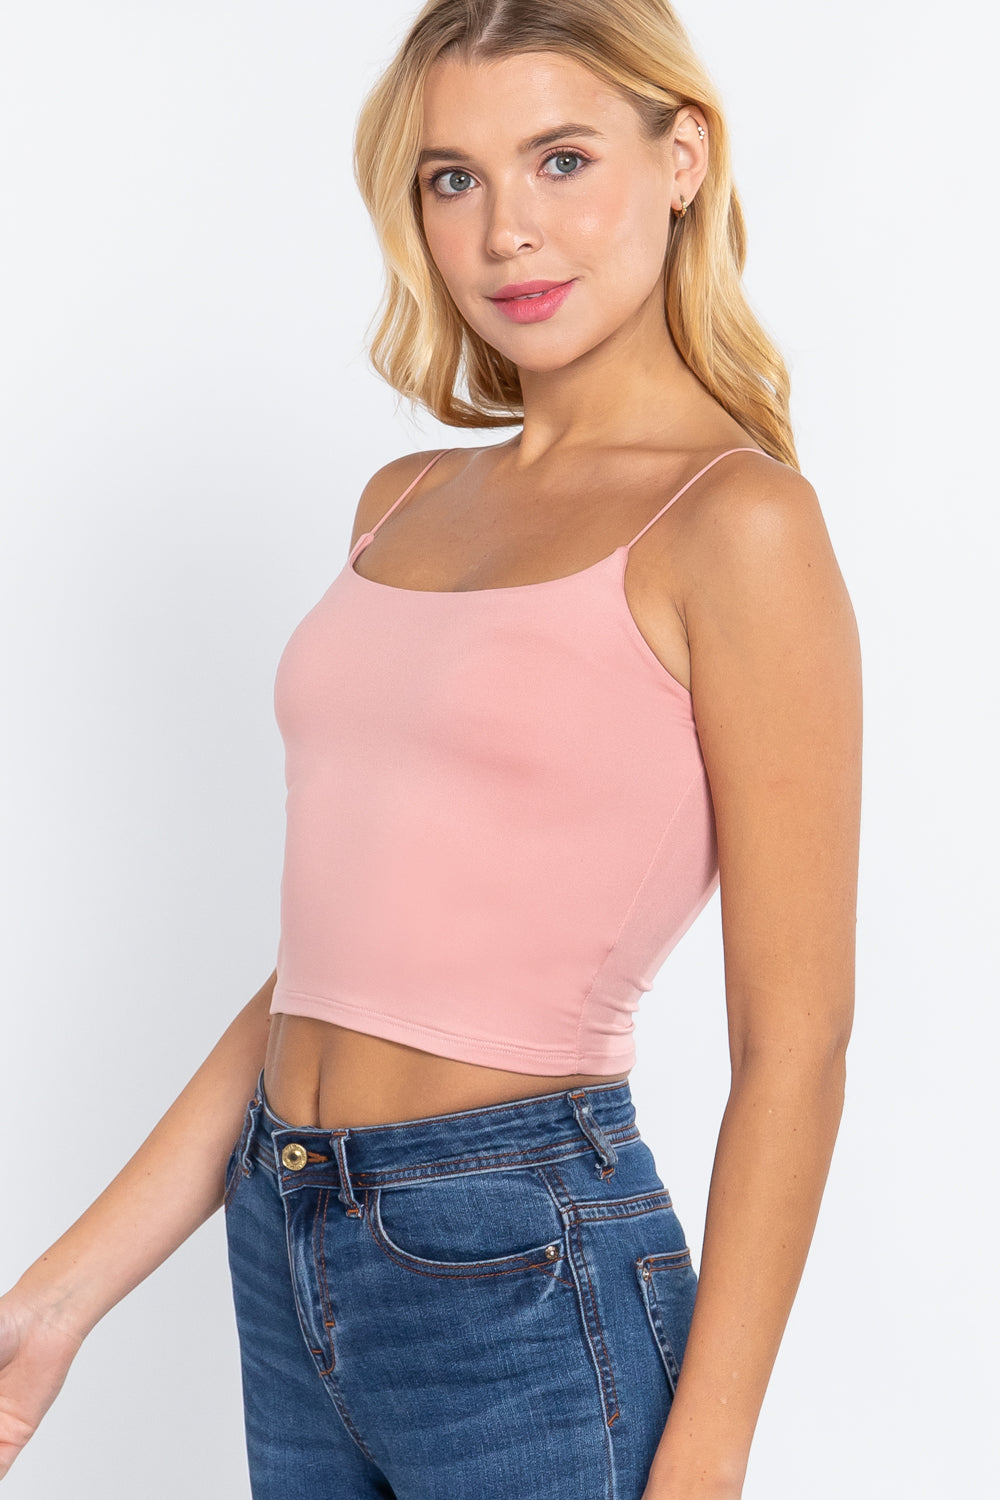 PINK Elastic Strap Two Ply Dty Brushed Knit Cami Top - Ships from The USA - women's cami at TFC&H Co.